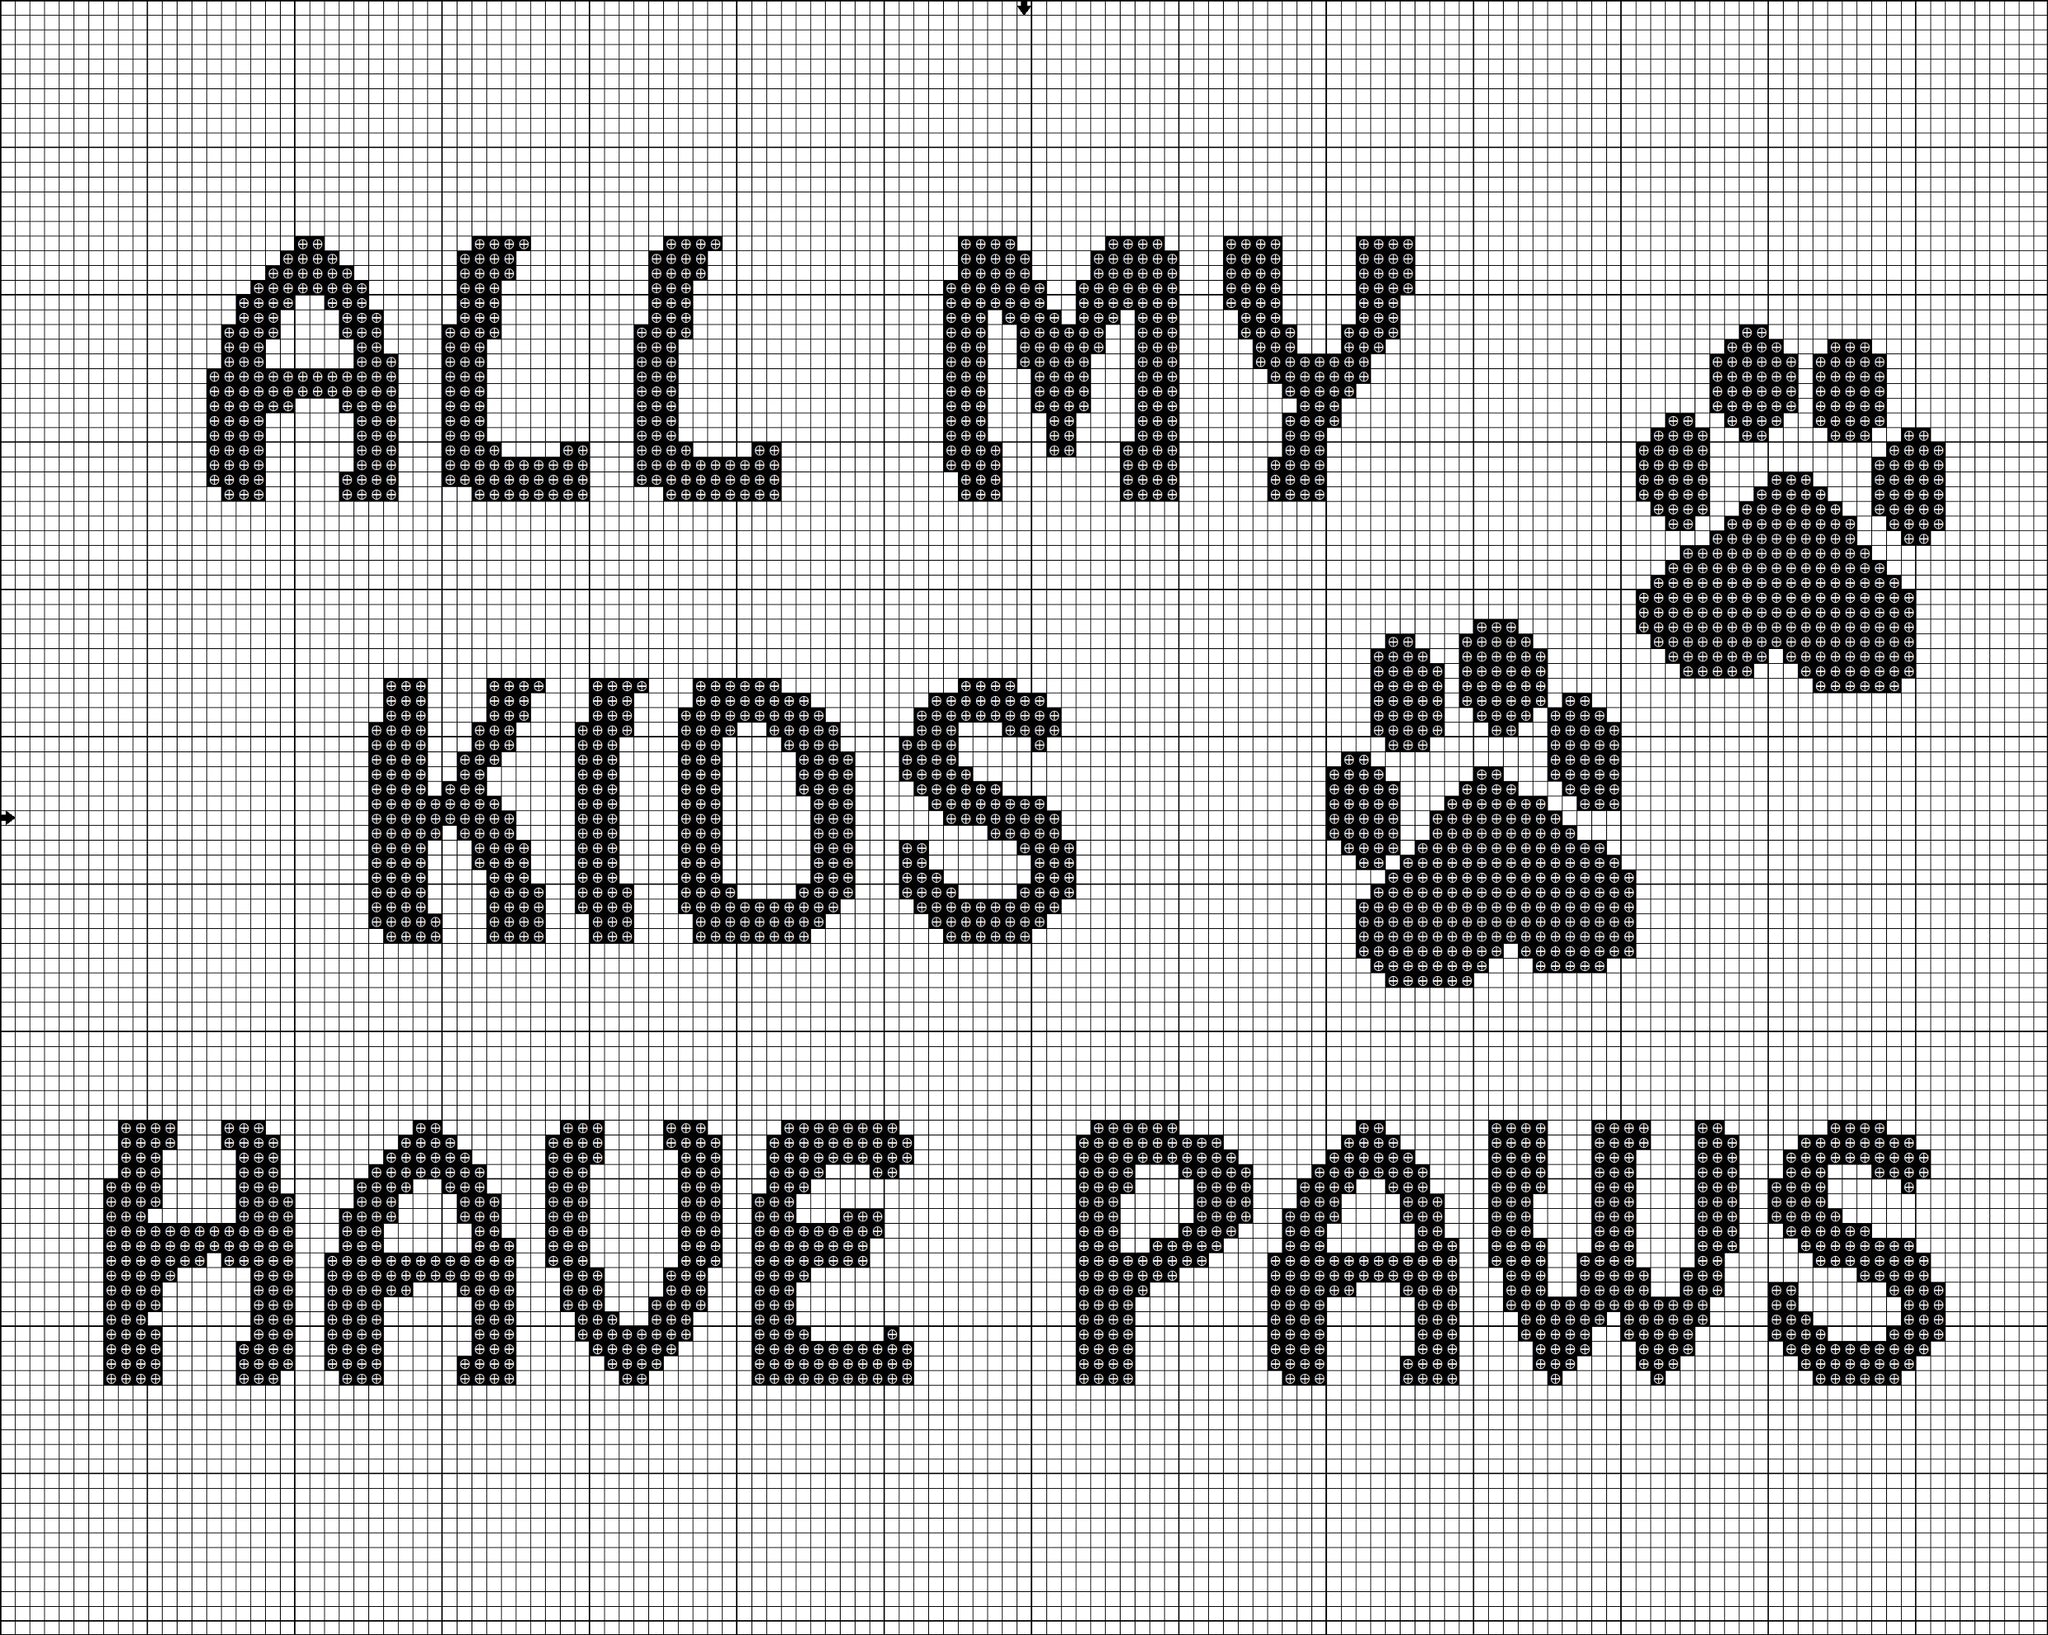 All my kids have paws funny quote cute animals free cross stitch pattern - Tango Stitch